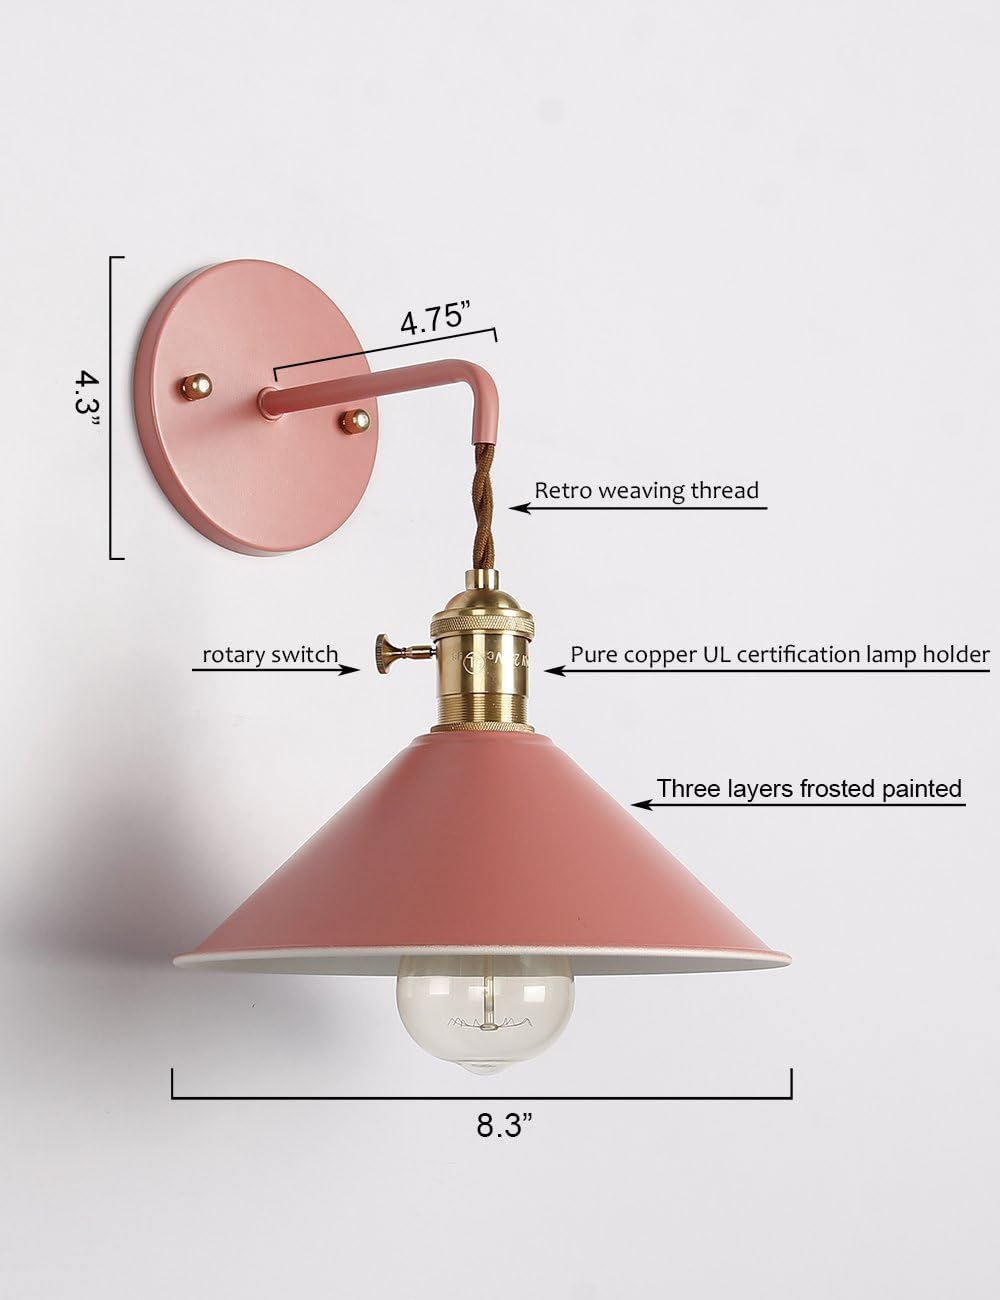 iYoee Wall Sconce Lamps Lighting Fixture with on Off Switch,White Macaron Wall lamp E26 Edison Copper lamp Holder with Frosted